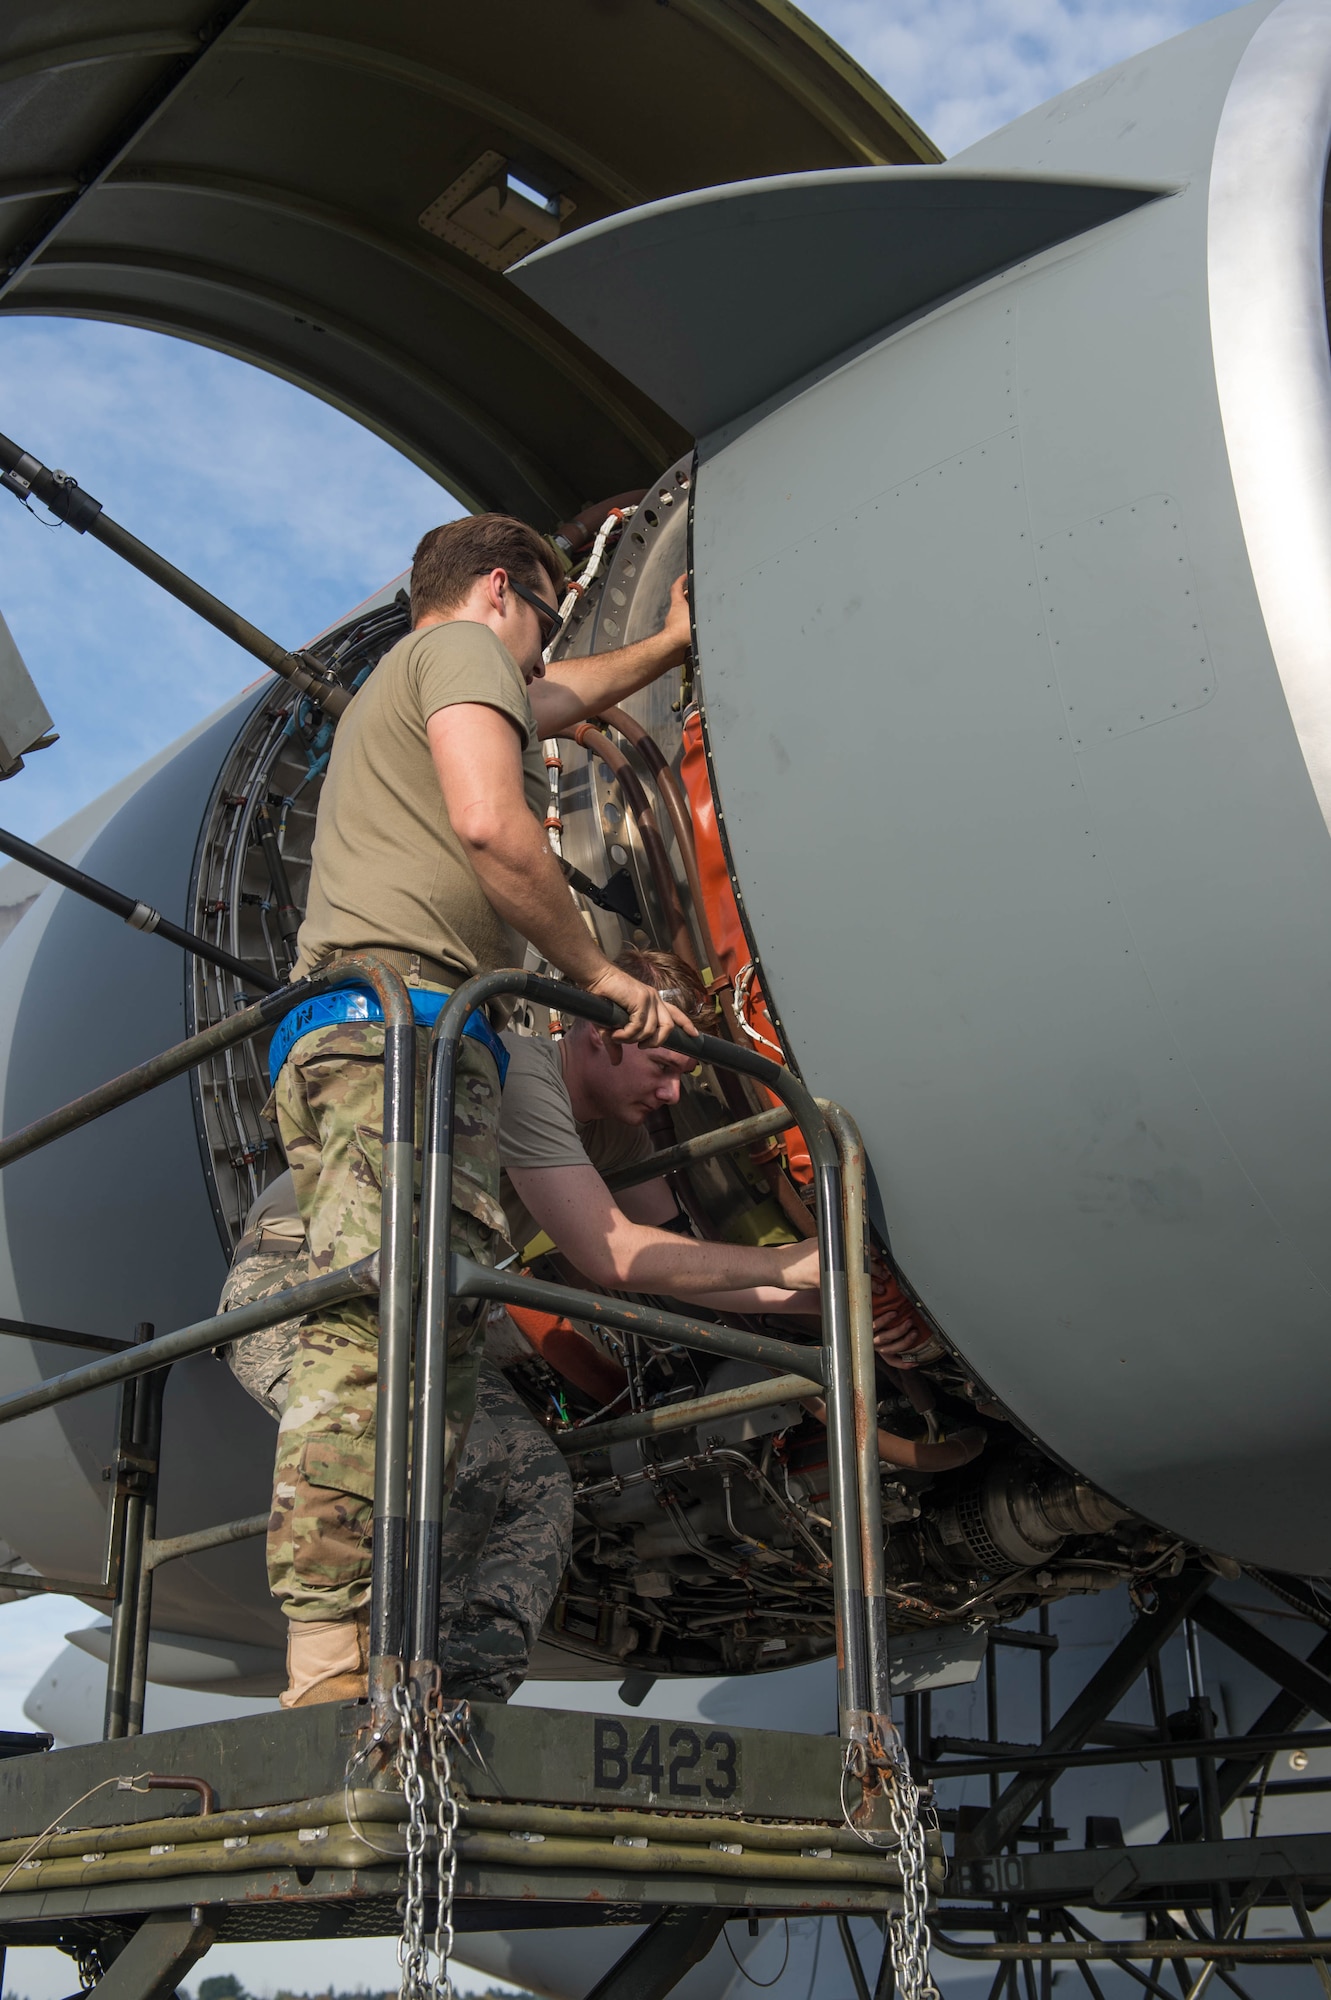 Senior Airman Matt Summers, left, and Airman 1st Class Tanner Felmlee, 62nd Maintenance Squadron, replace an engine ring cowl on a Royal Australian Air Force C-17 Globemaster III at Joint Base Lewis-McChord, Wash., Sept. 5, 2019.